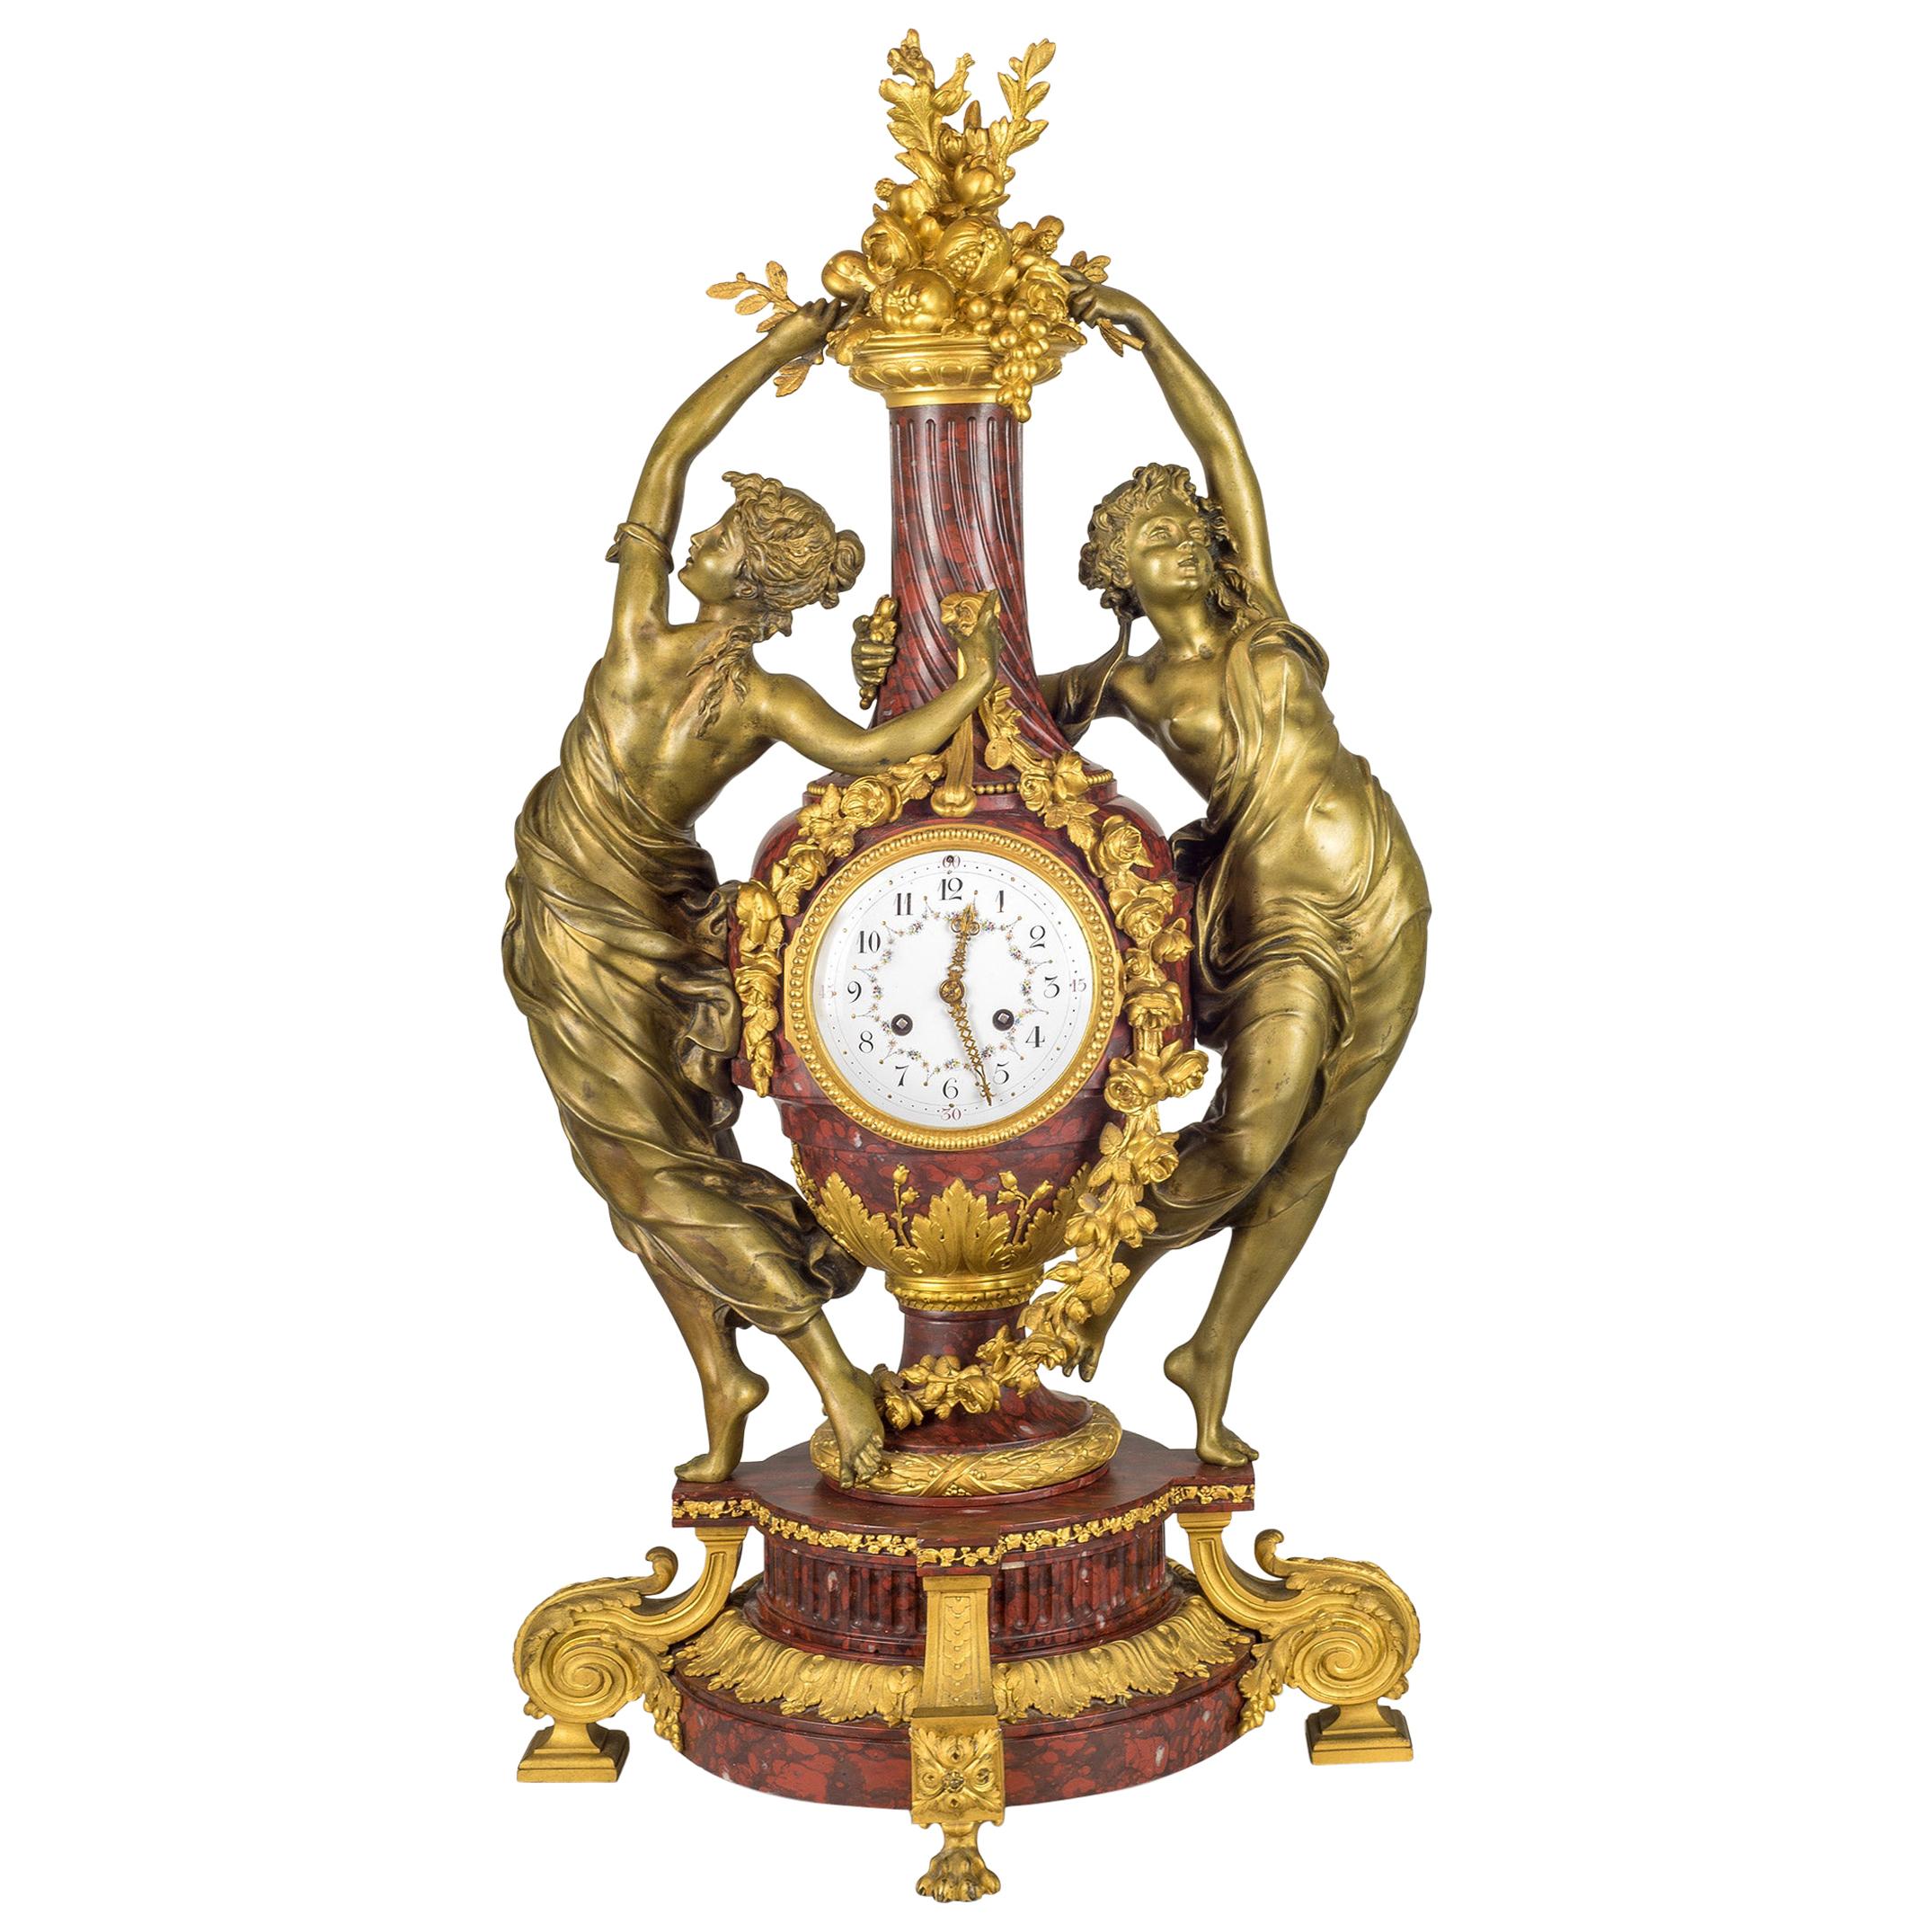 Very Important French Japy Frères Figural Mantel Clock